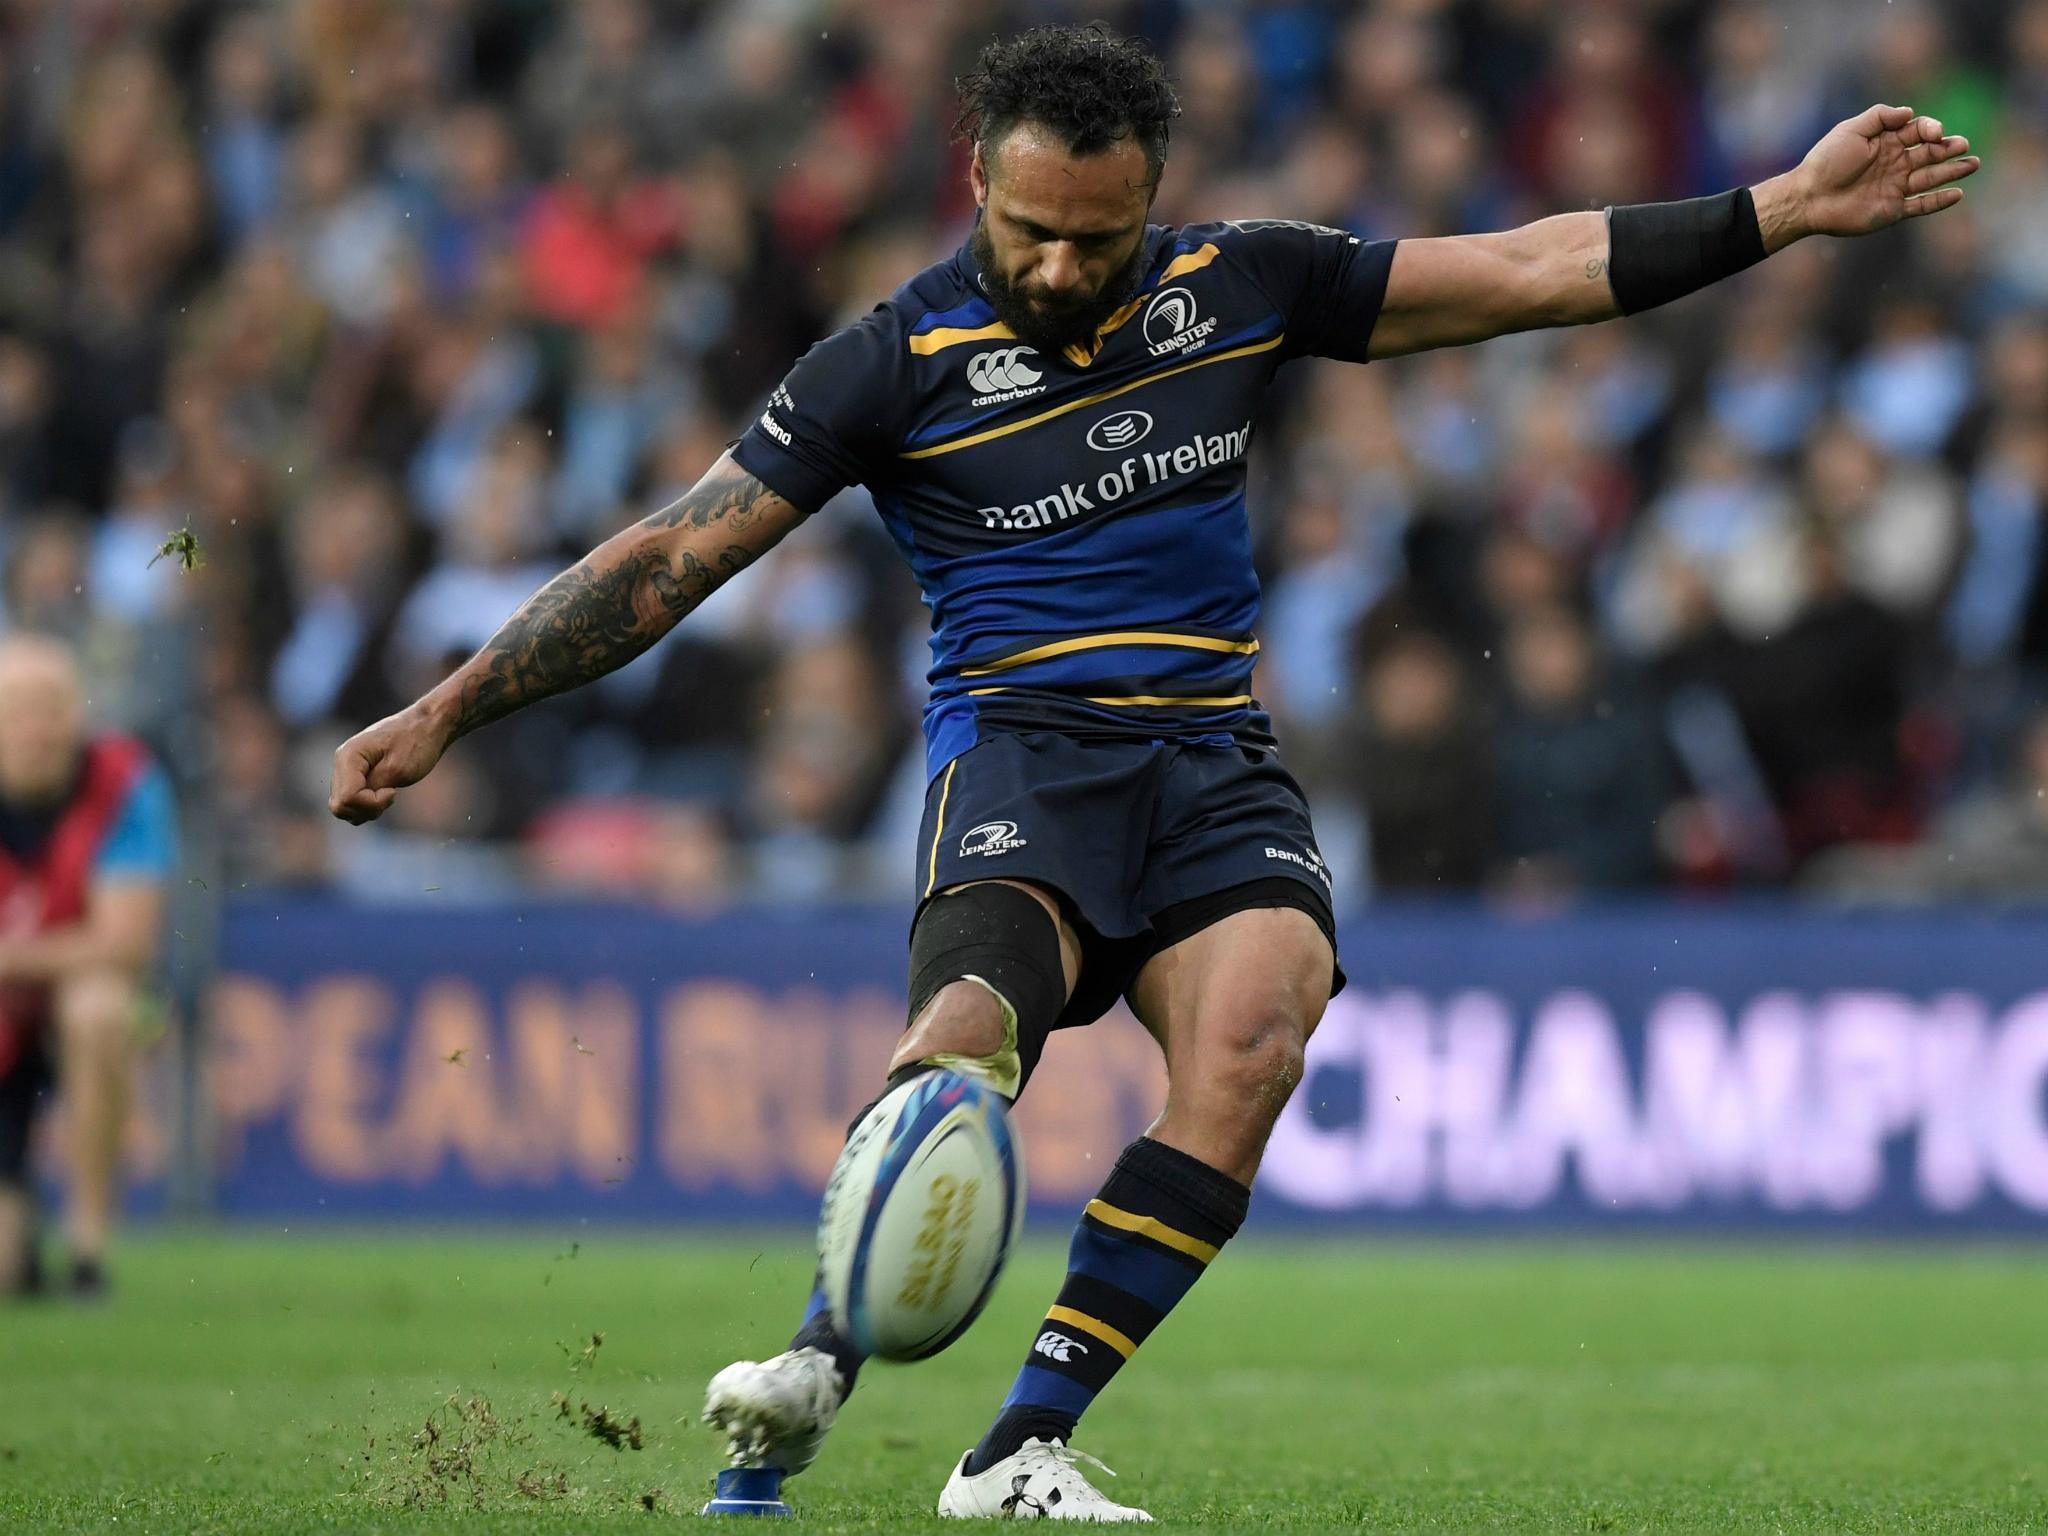 Nacewa kicked two late penalties to win the European Champions Cup for Leinster